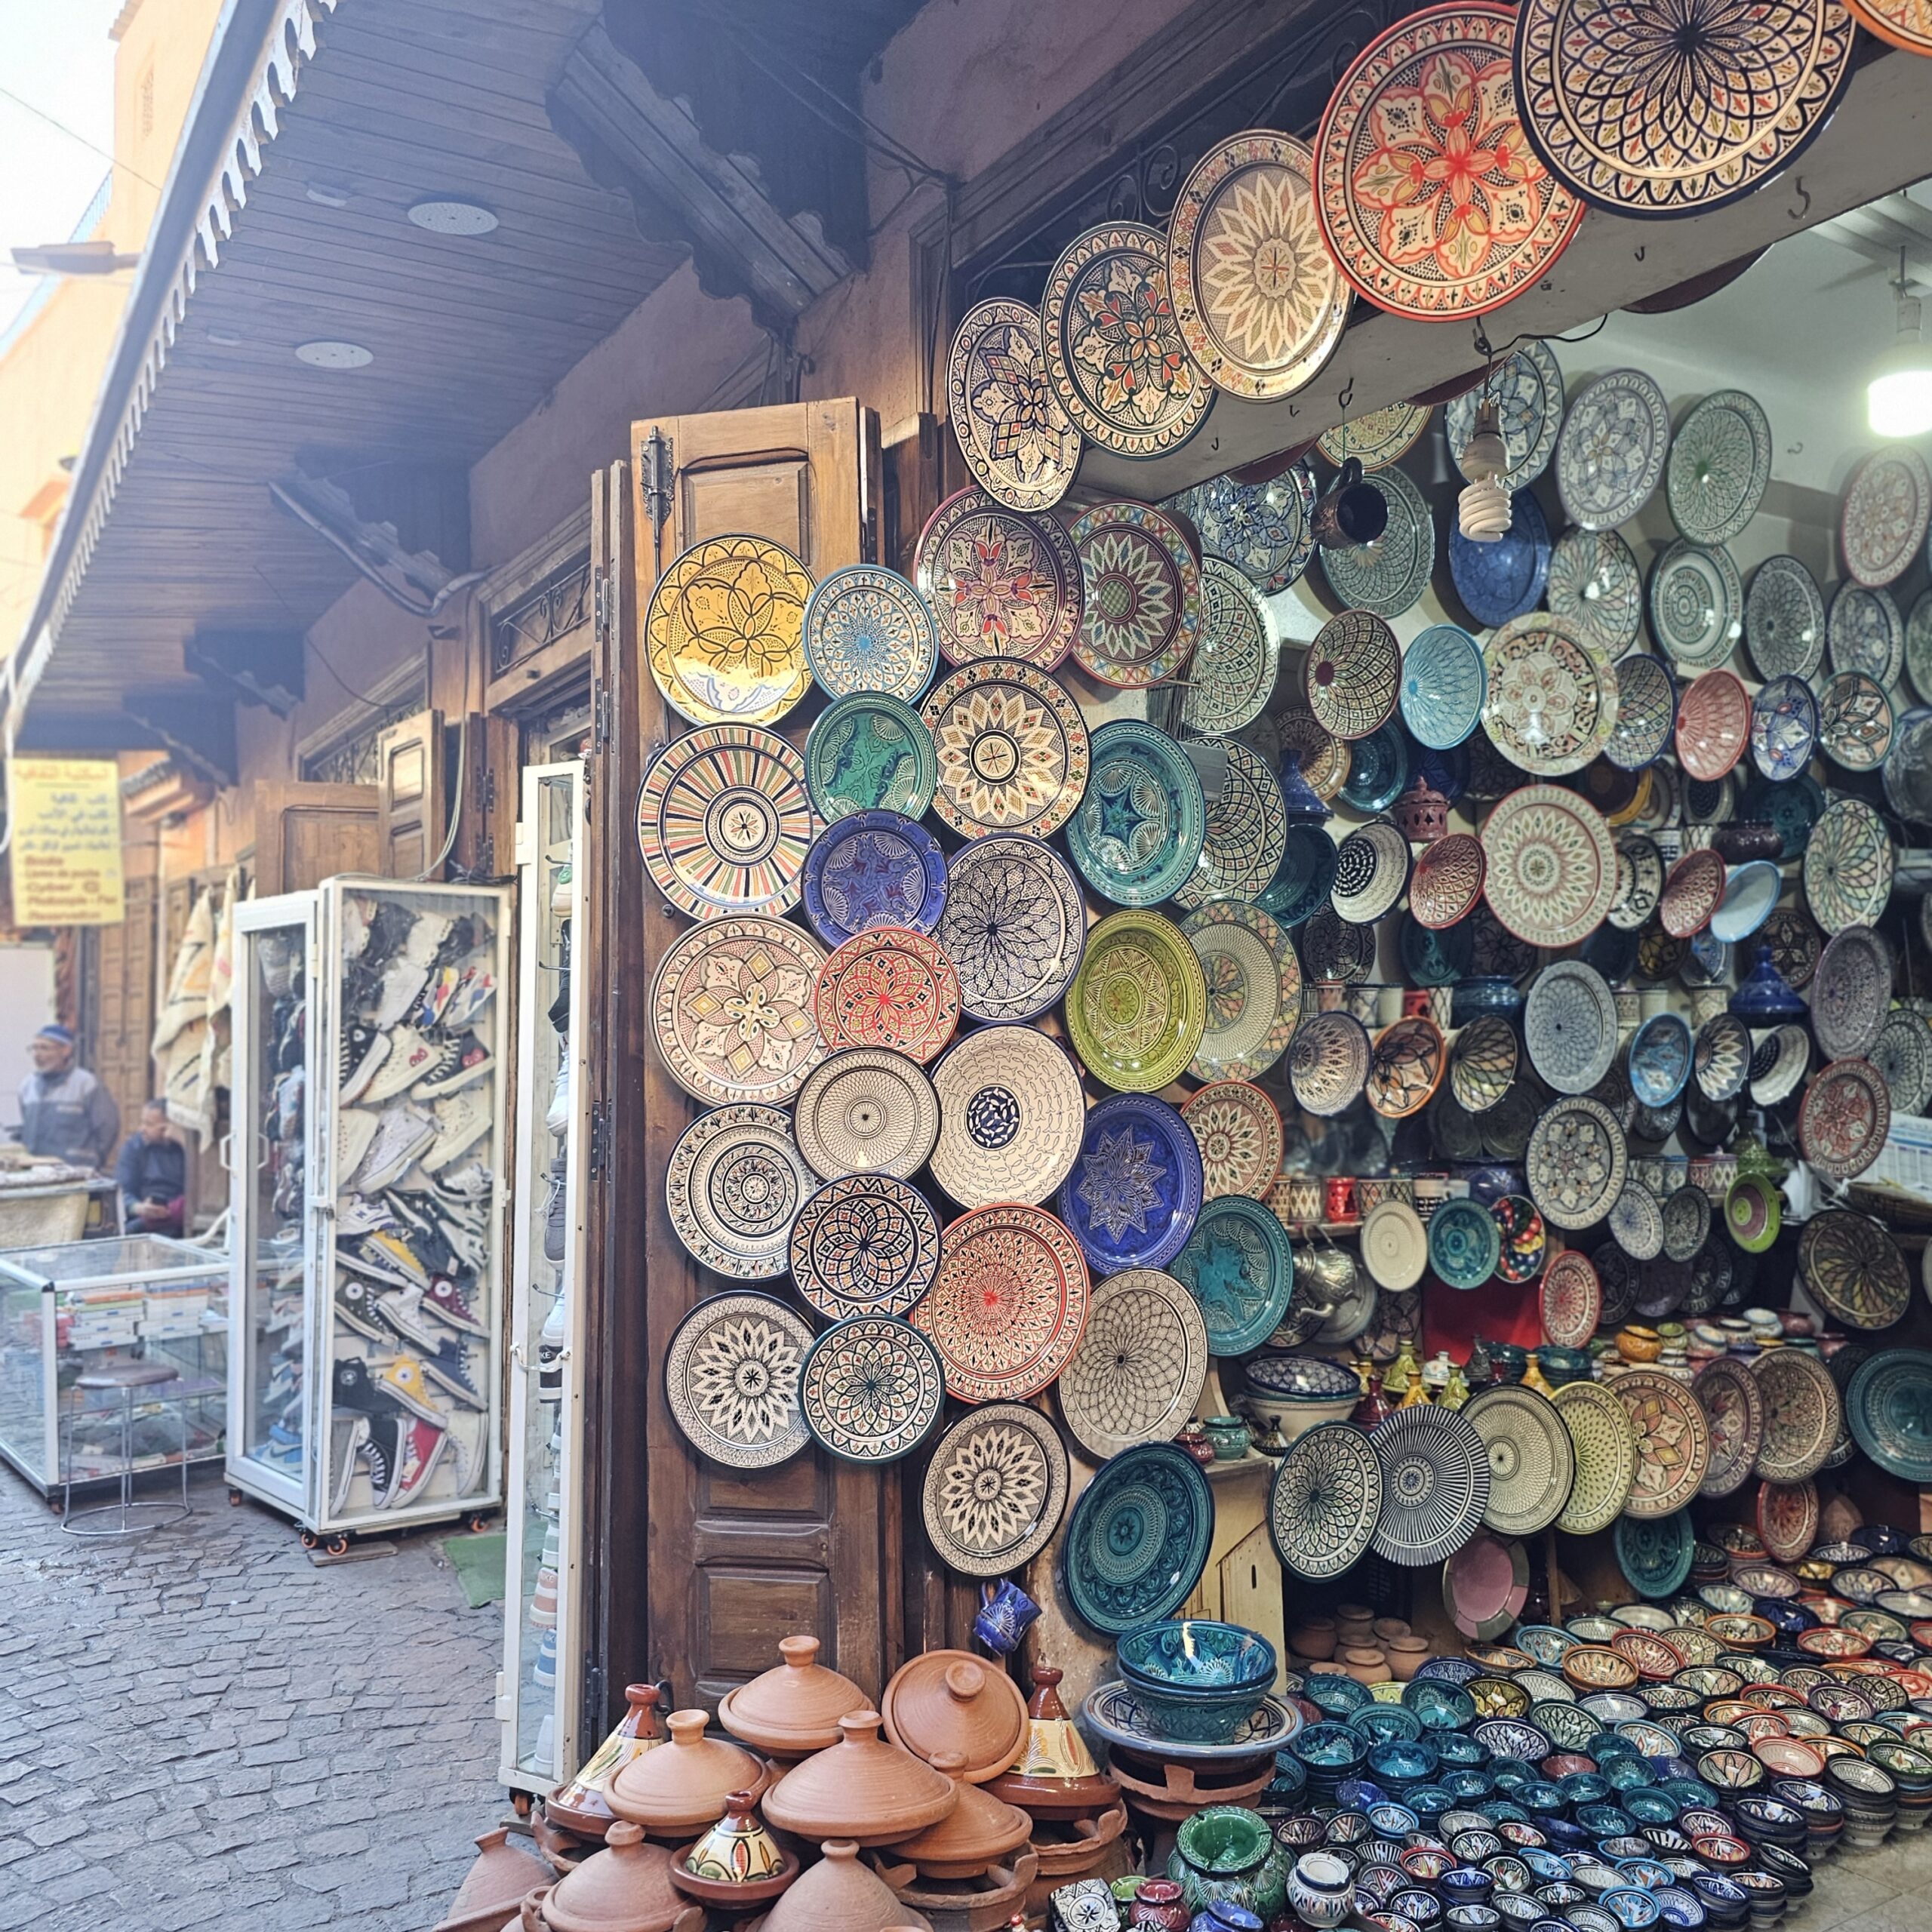 A stall selling colourful Moroccan plates and dishes in a souk in Jemaa El Fnaa, Marrakesh. Image by 360onhistory.com